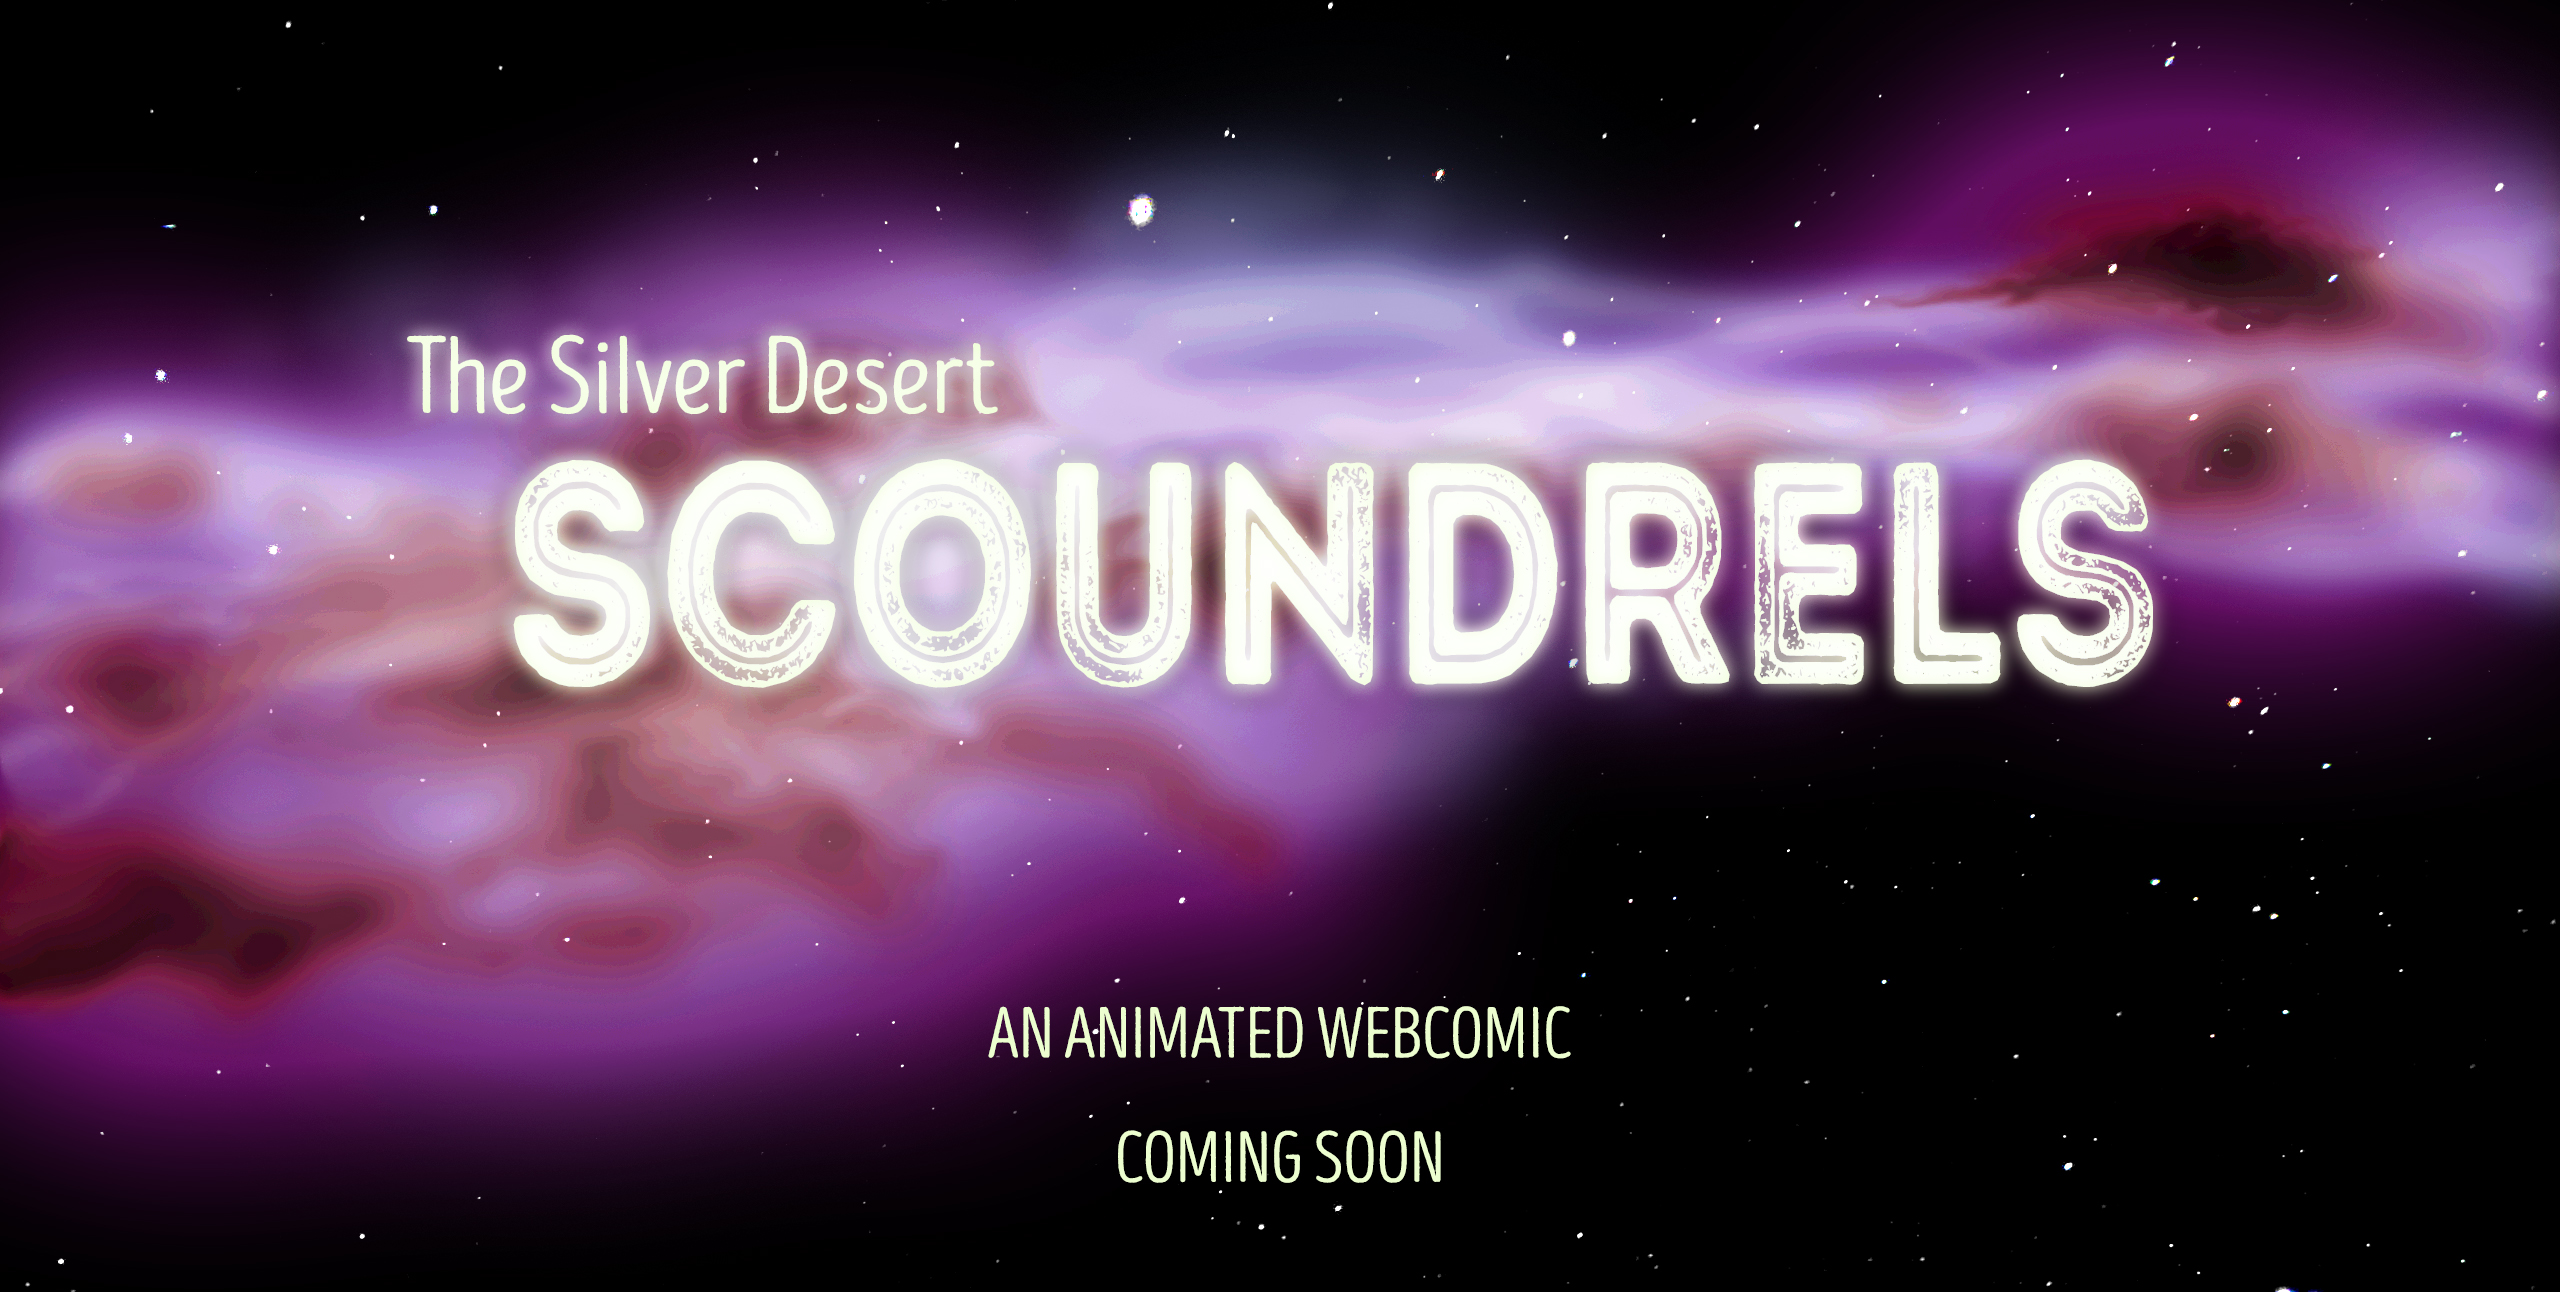 The Silver Desert Scoundrels: An Animated Webcomic. Coming Soon.